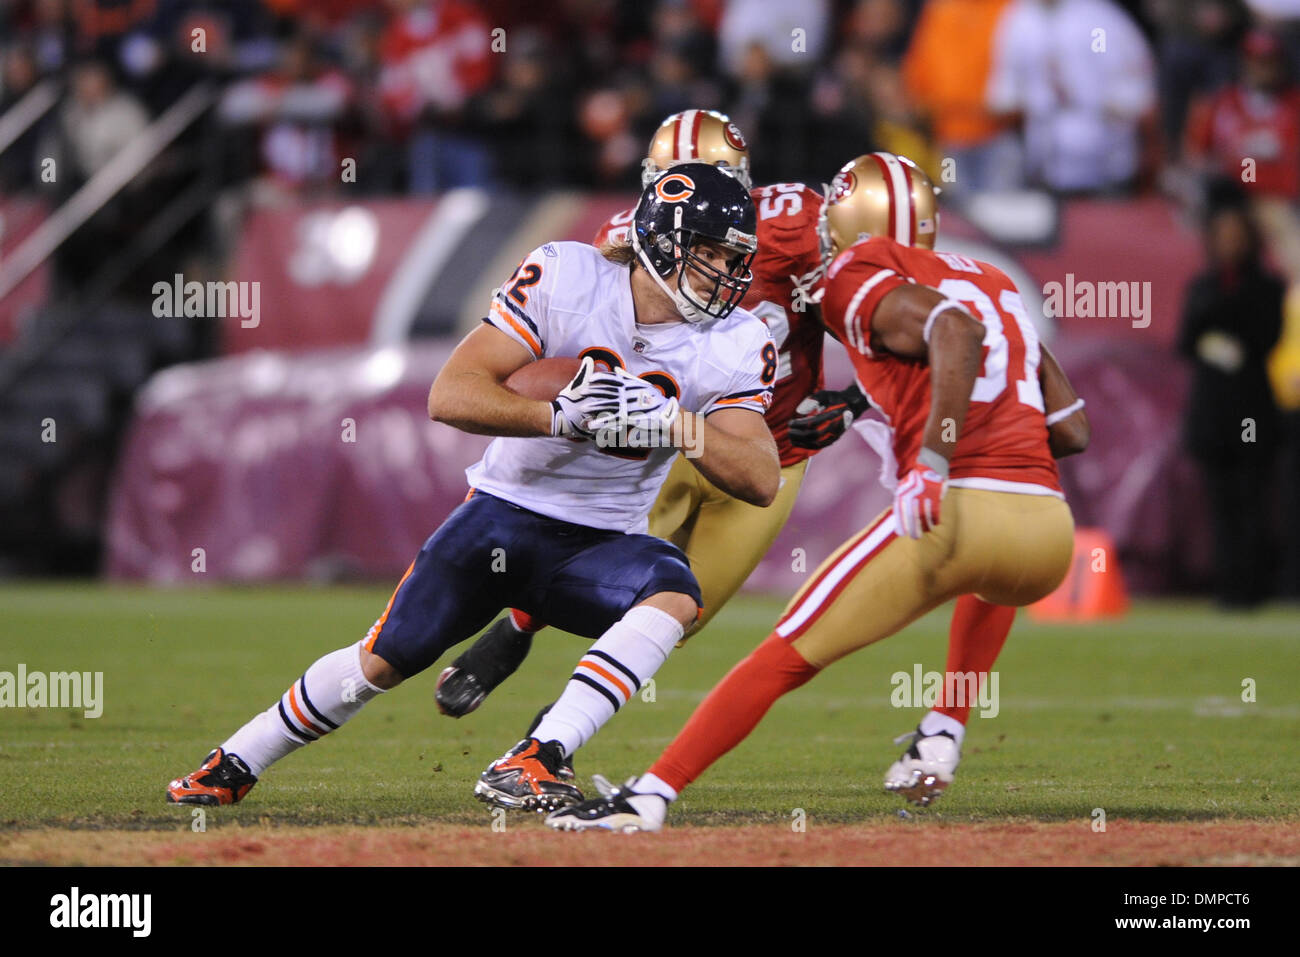 Nov. 12, 2009 - San Francisco, California, U.S - 12 Novemberber 2009: Chicago Bears tight end Greg Olsen (82) braces for a collission with San Francisco 49ers defensive back Dre' Bly (31) during the NFL football game between the Chicago Bears and San Francisco 49ers at Candlestick Park in San Francisco, California. (Credit Image: © Matt Cohen/Southcreek Global/ZUMApress.com) Stock Photo